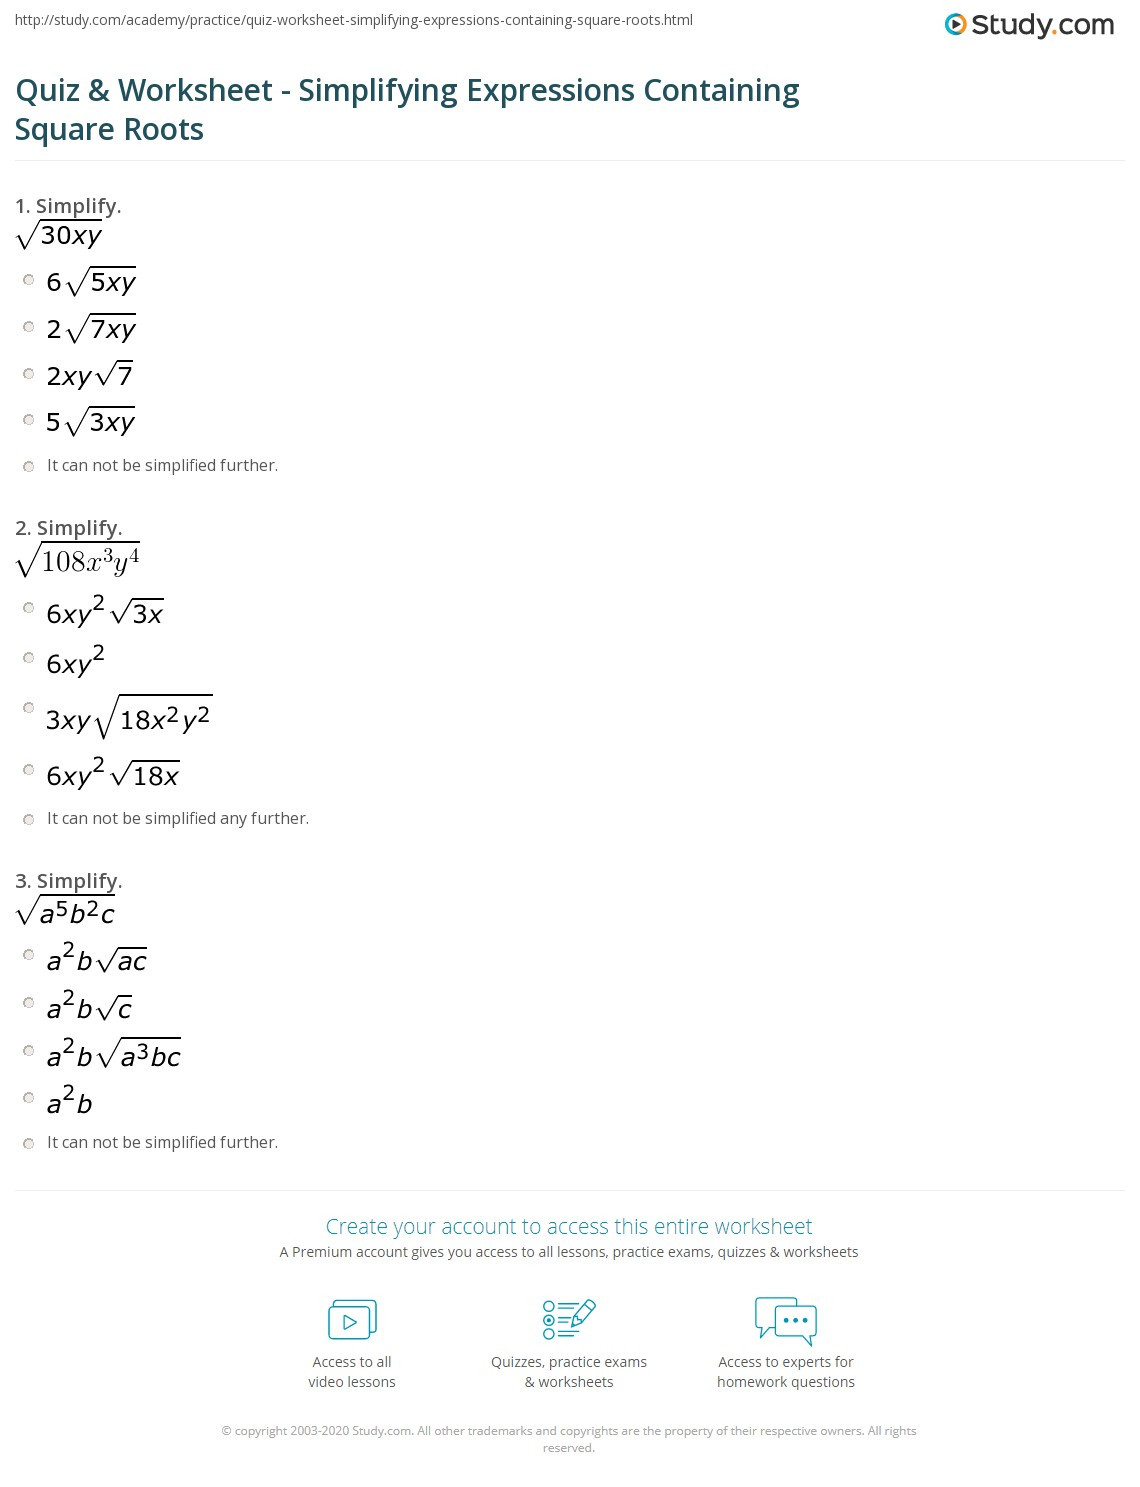 Simplify Square Roots Worksheet Quiz &amp; Worksheet Simplifying Expressions Containing Square